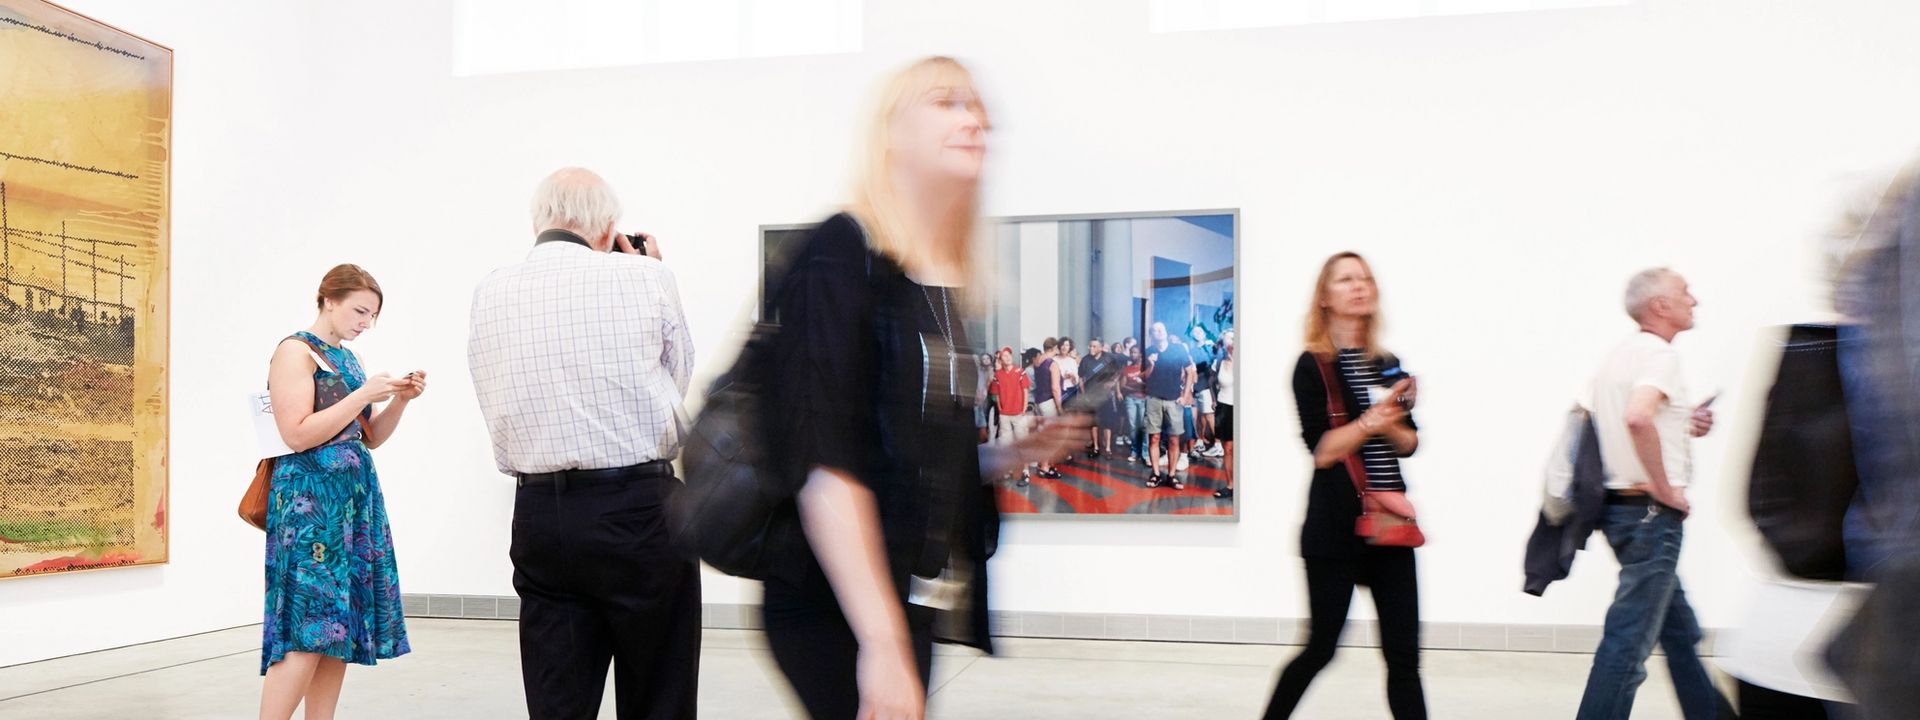 Visitors walking through a museum gallery